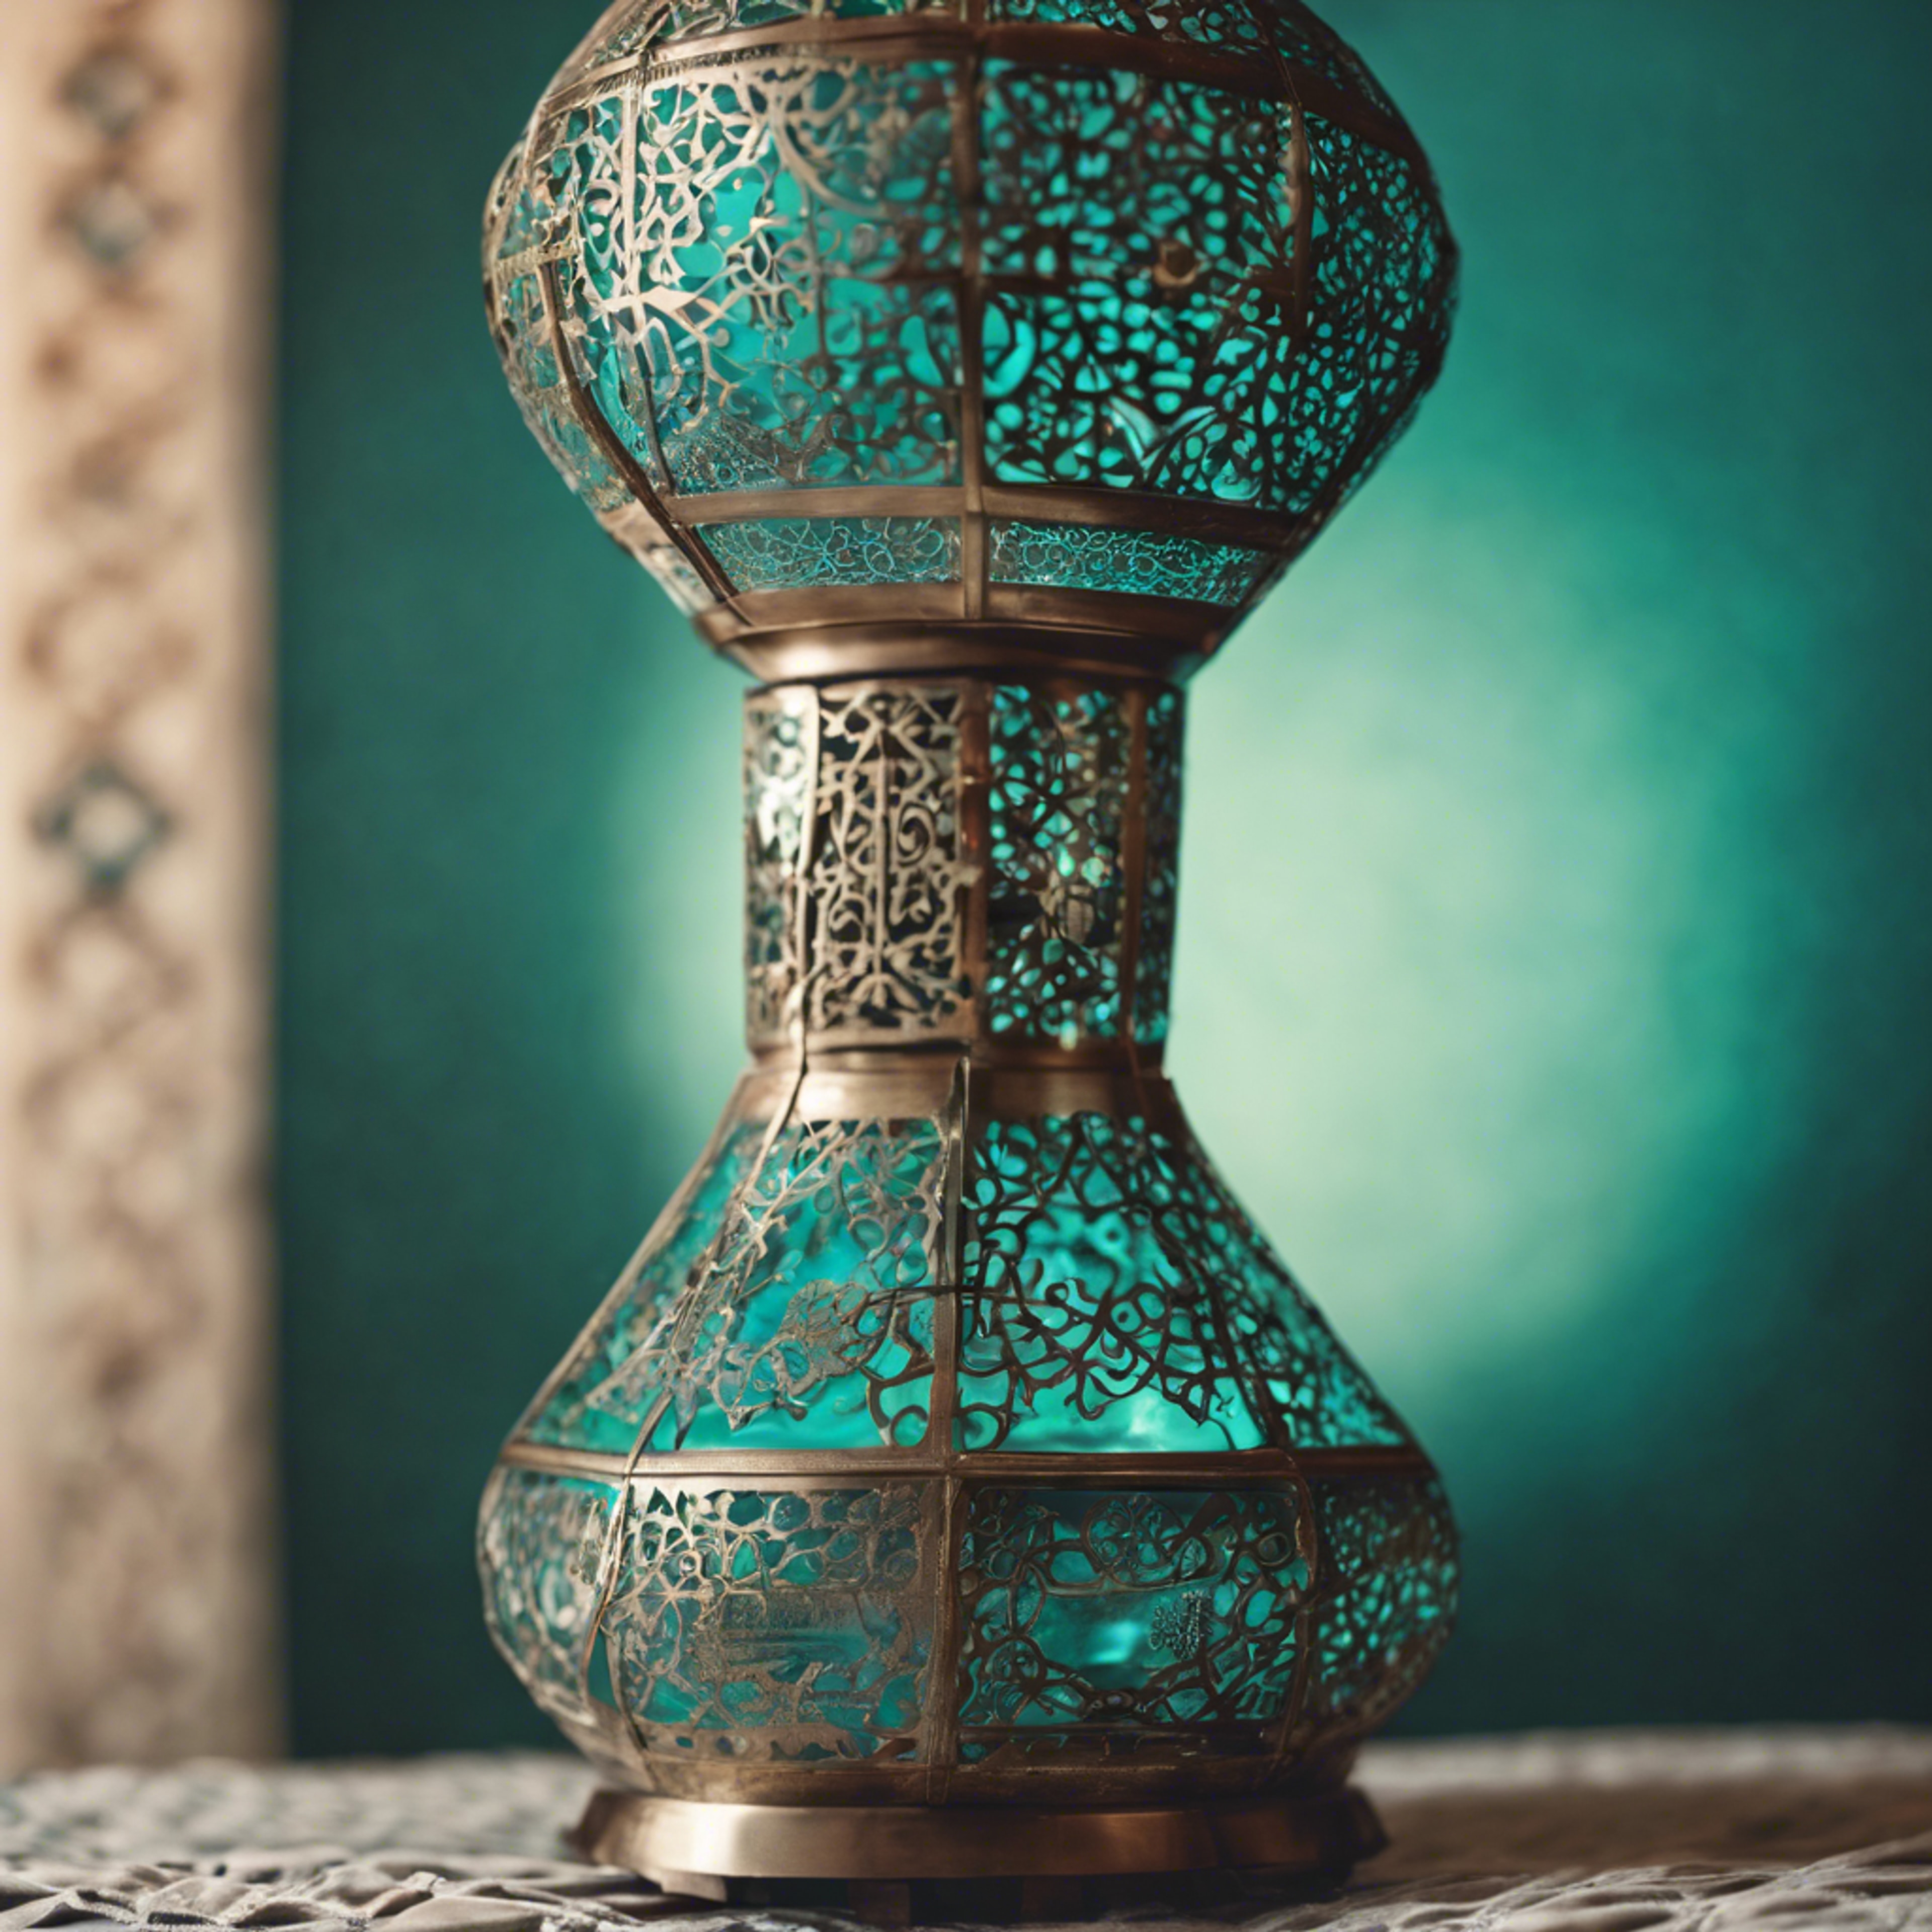 A traditional Moroccan lamp in a cool teal color. ផ្ទាំង​រូបភាព[a27f0371dbce4744aca5]